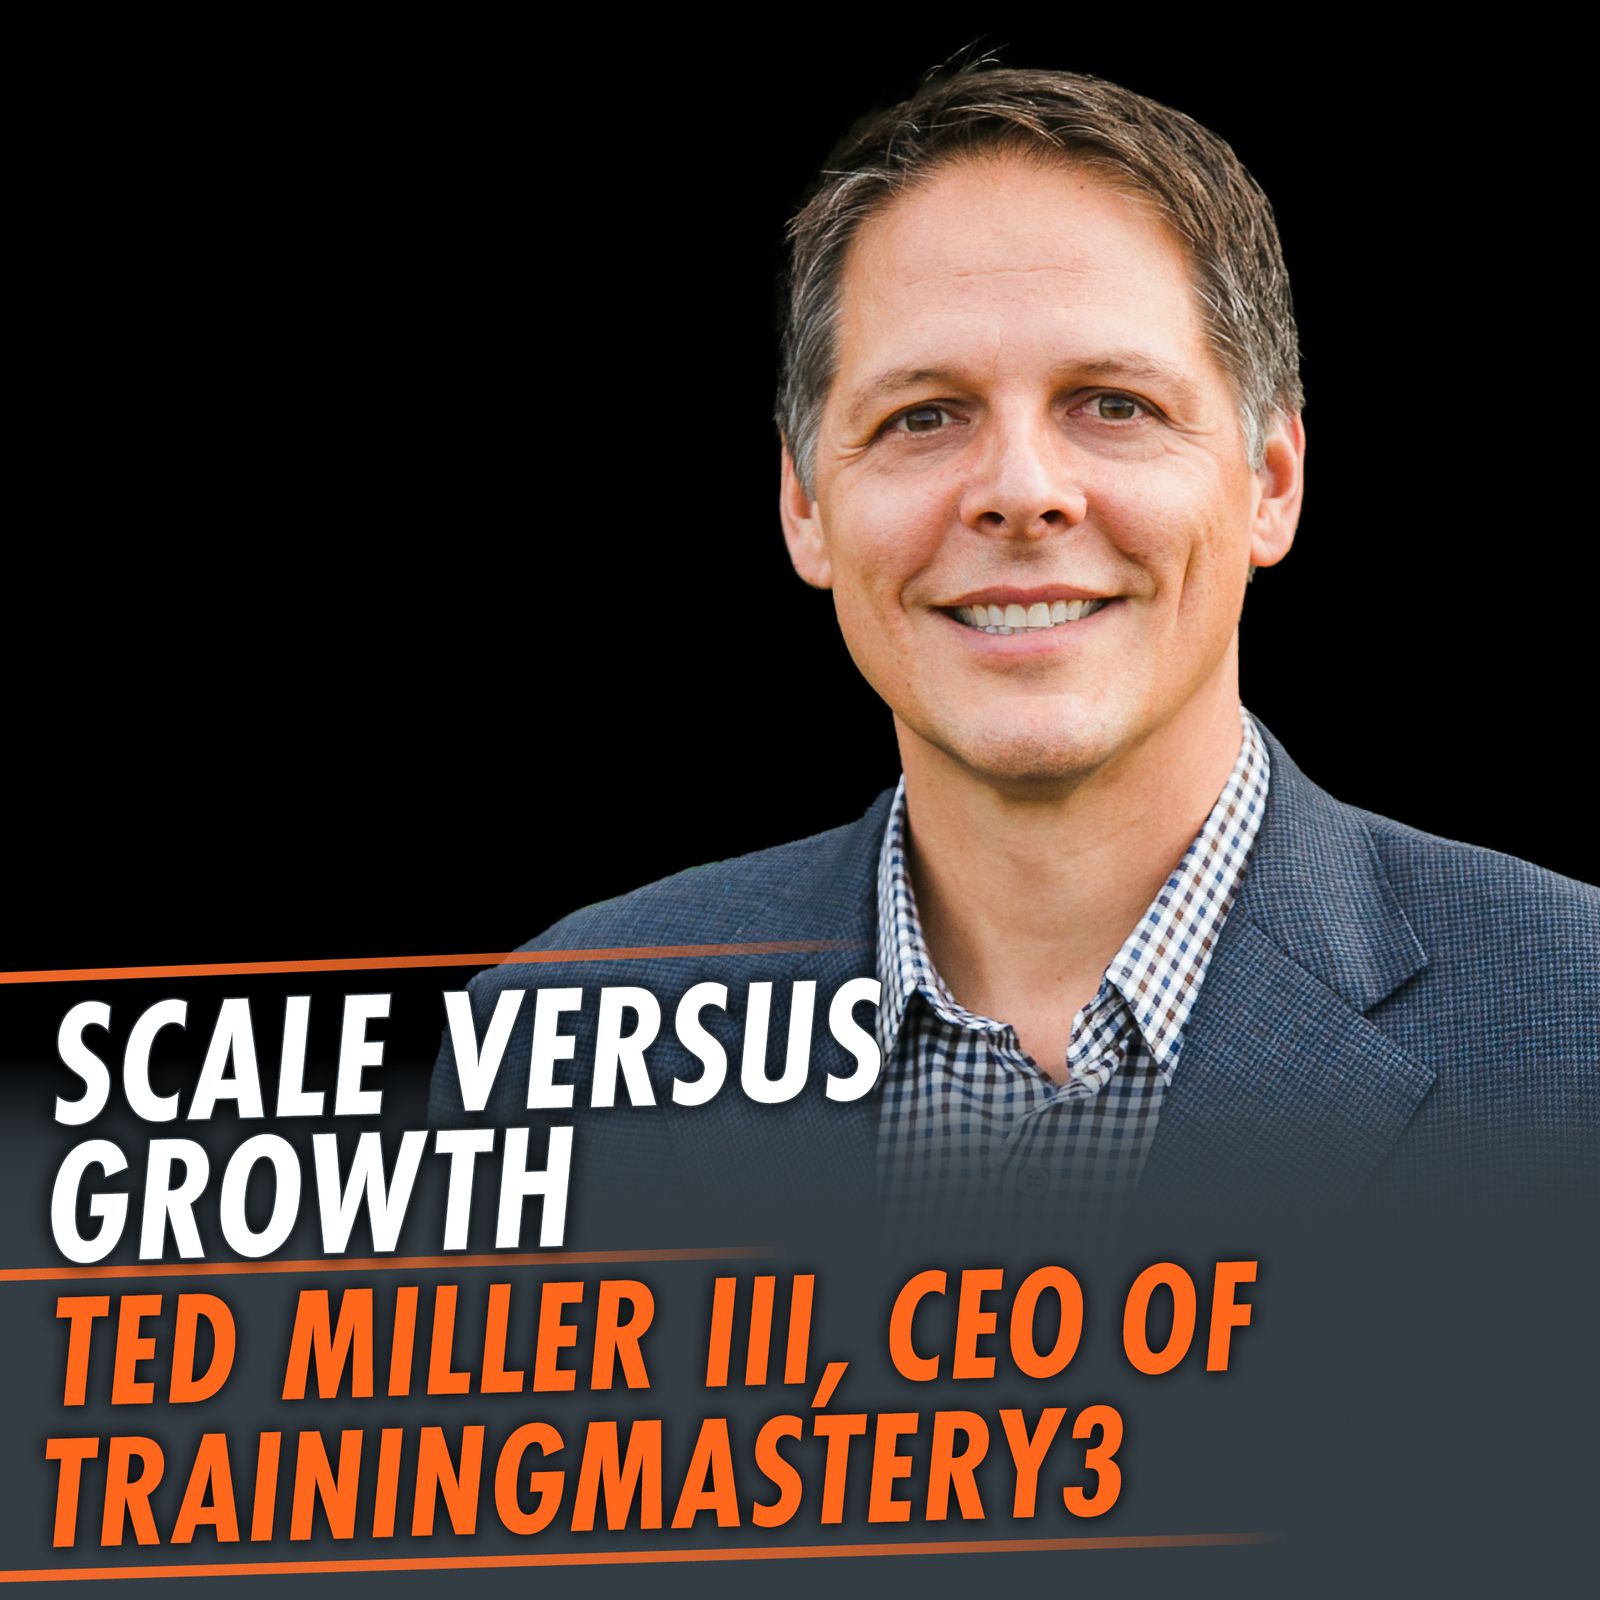 350: Scale Versus Growth featuring Ted Miller III, CEO of TrainingMastery3